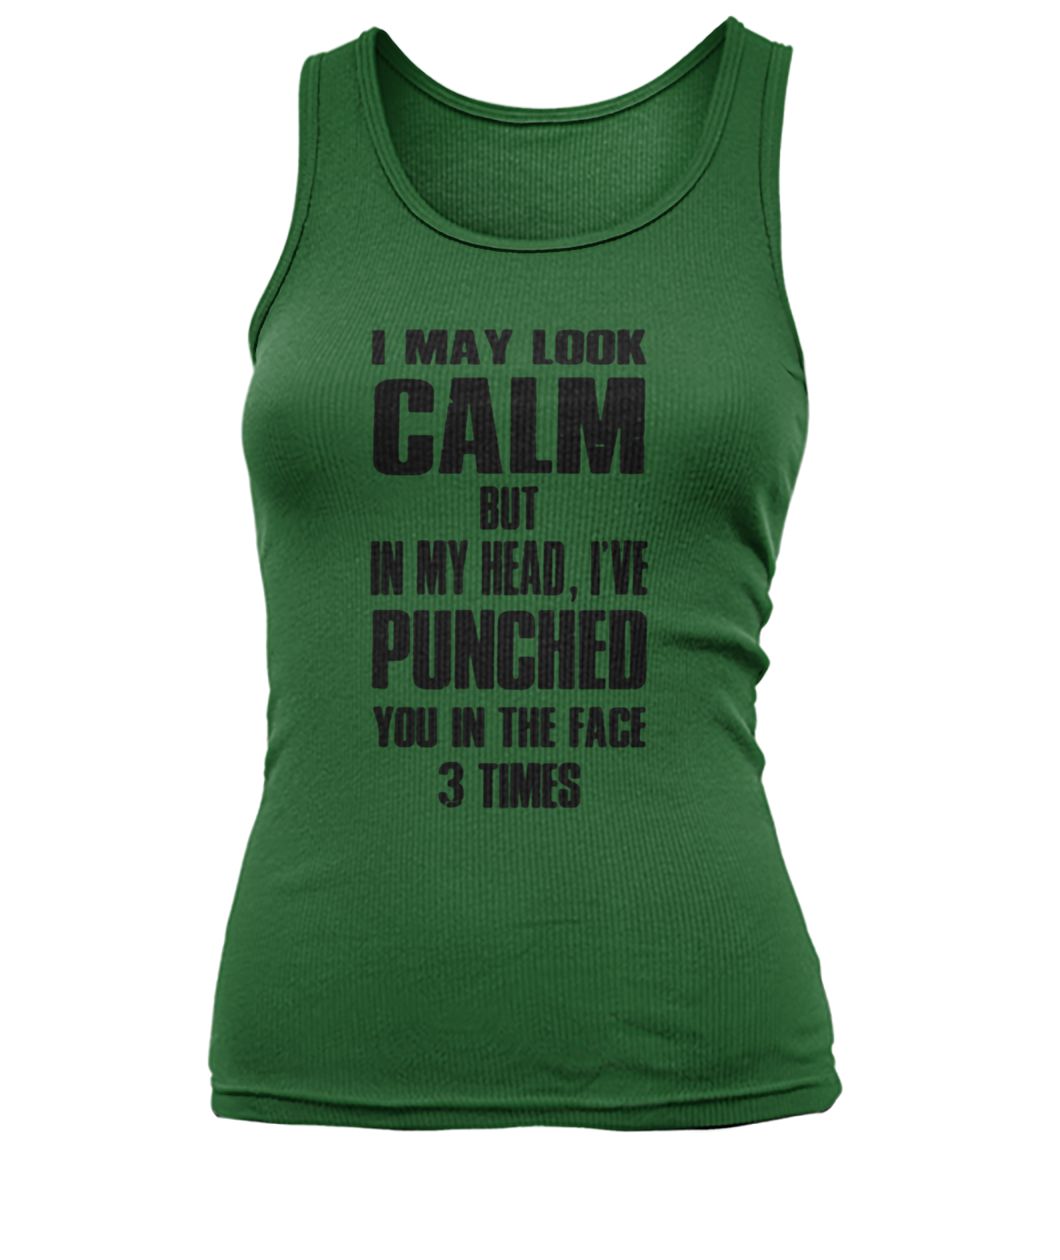 I may look calm but in my head I've punched you in your face 3 times women's tank top